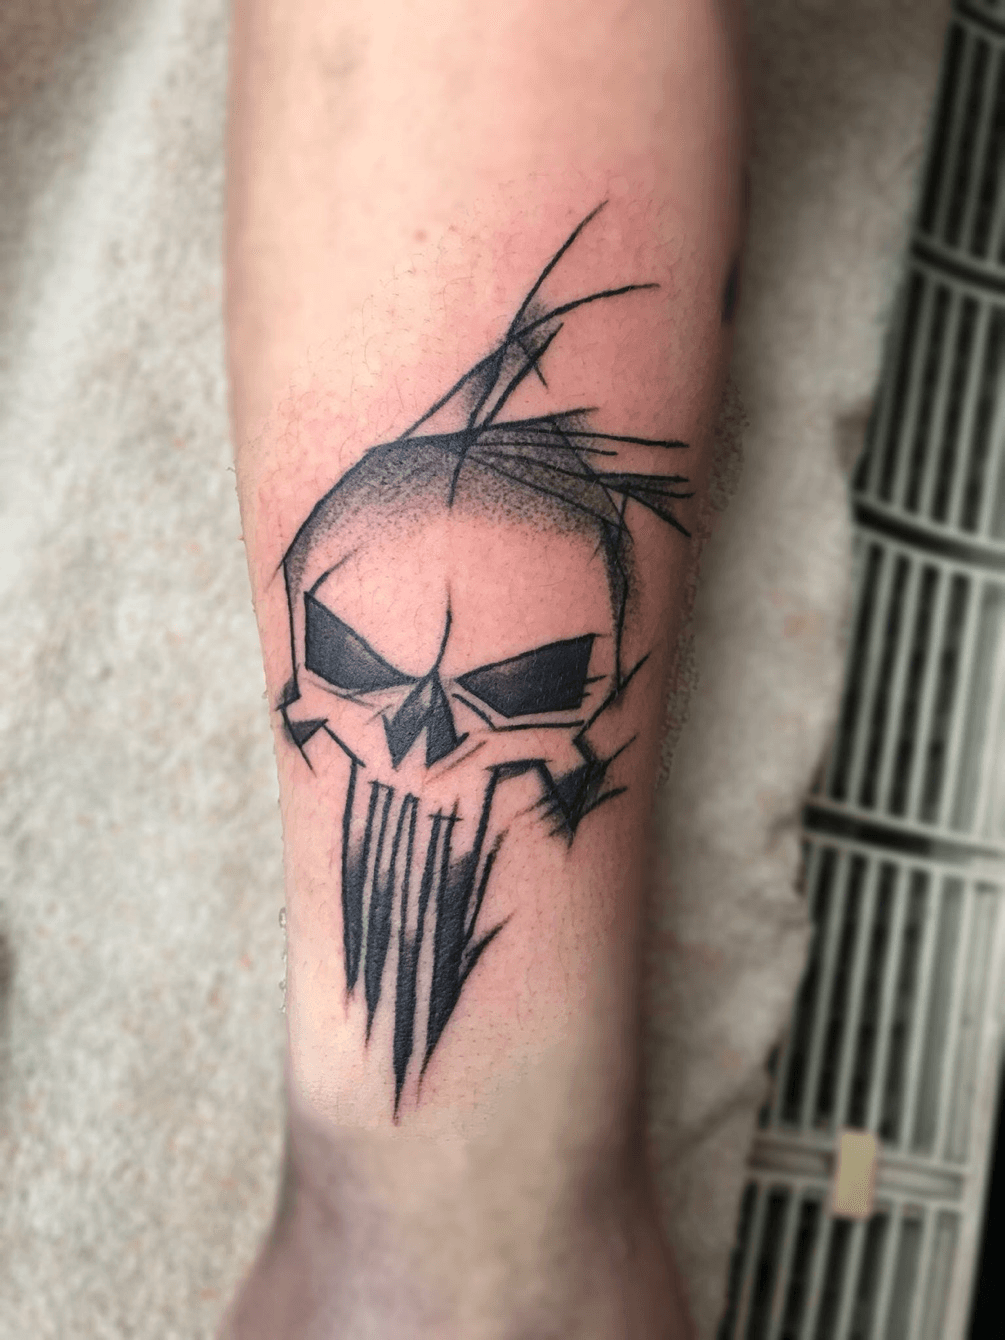 The Punisher Skull tattoo by TheRevolutionTattoos on DeviantArt